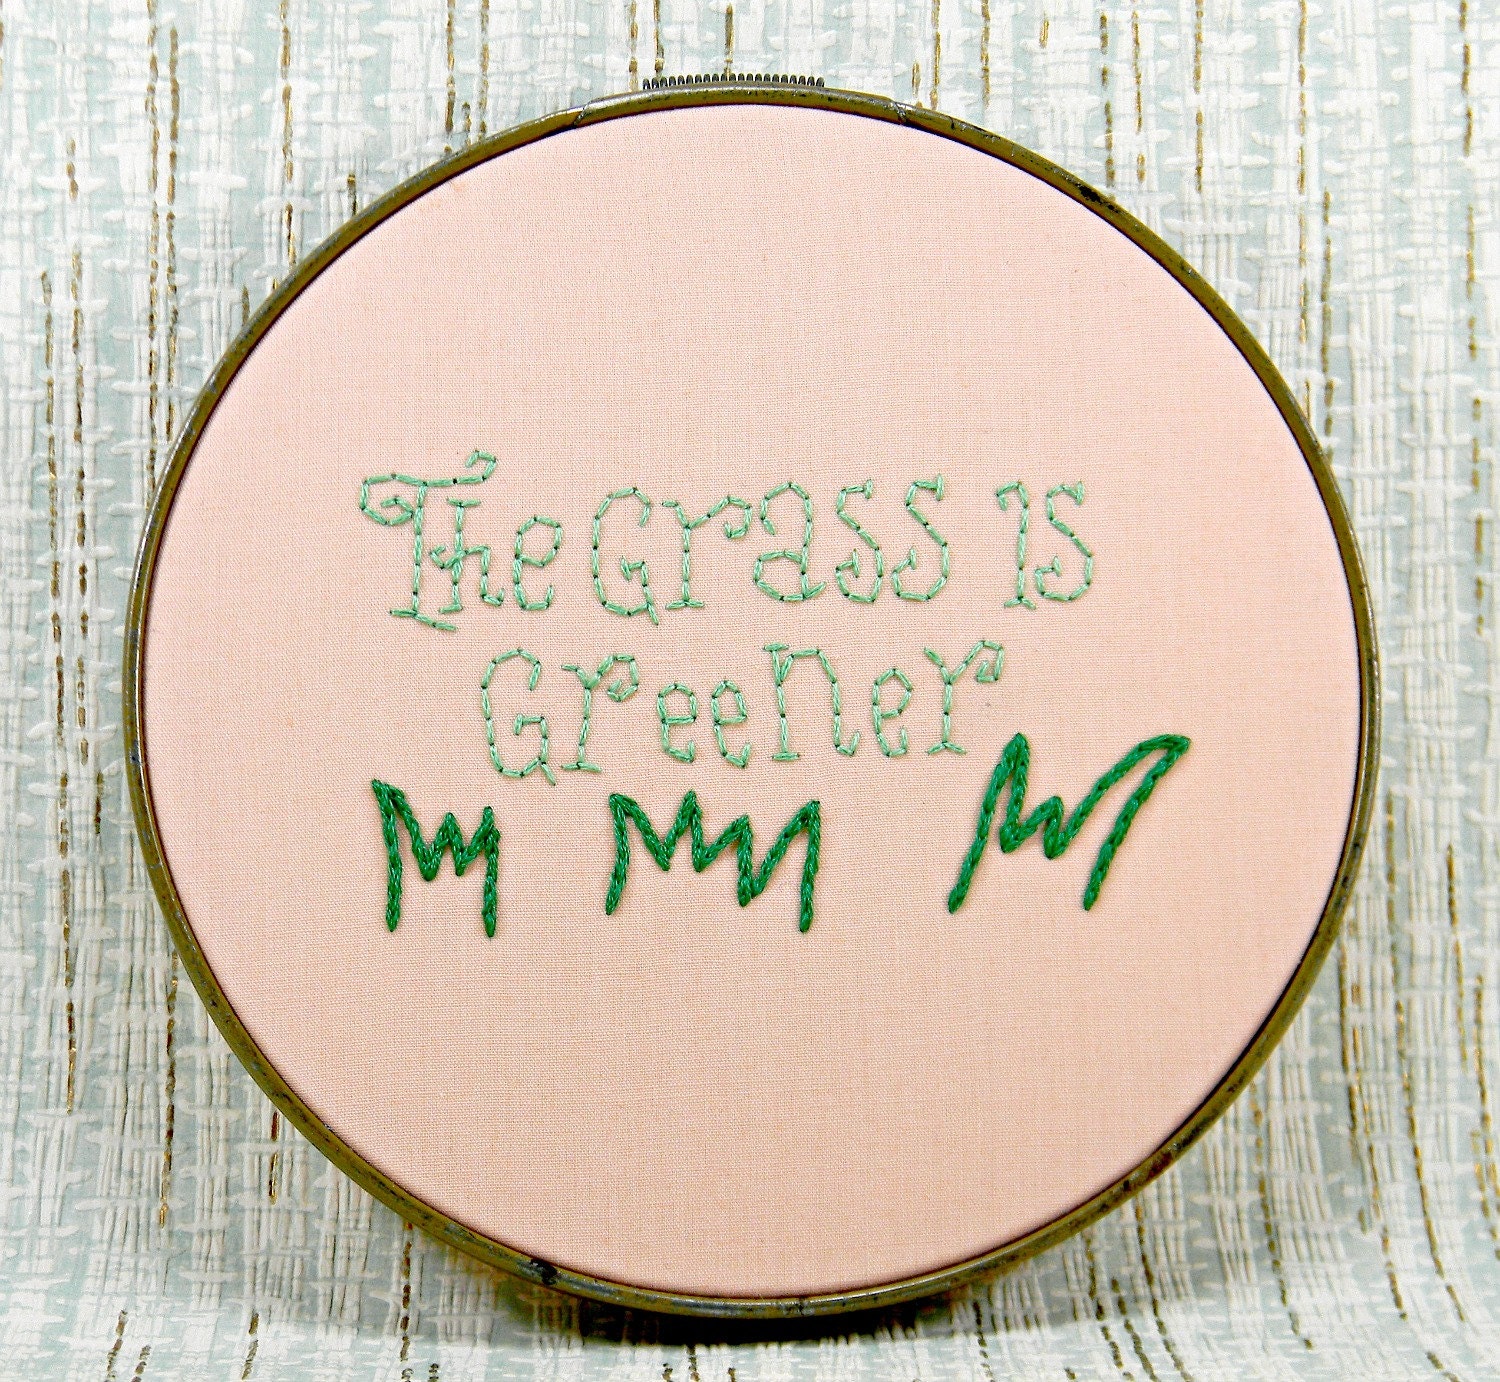 The Grass is Greener Embroidery Hoop Art